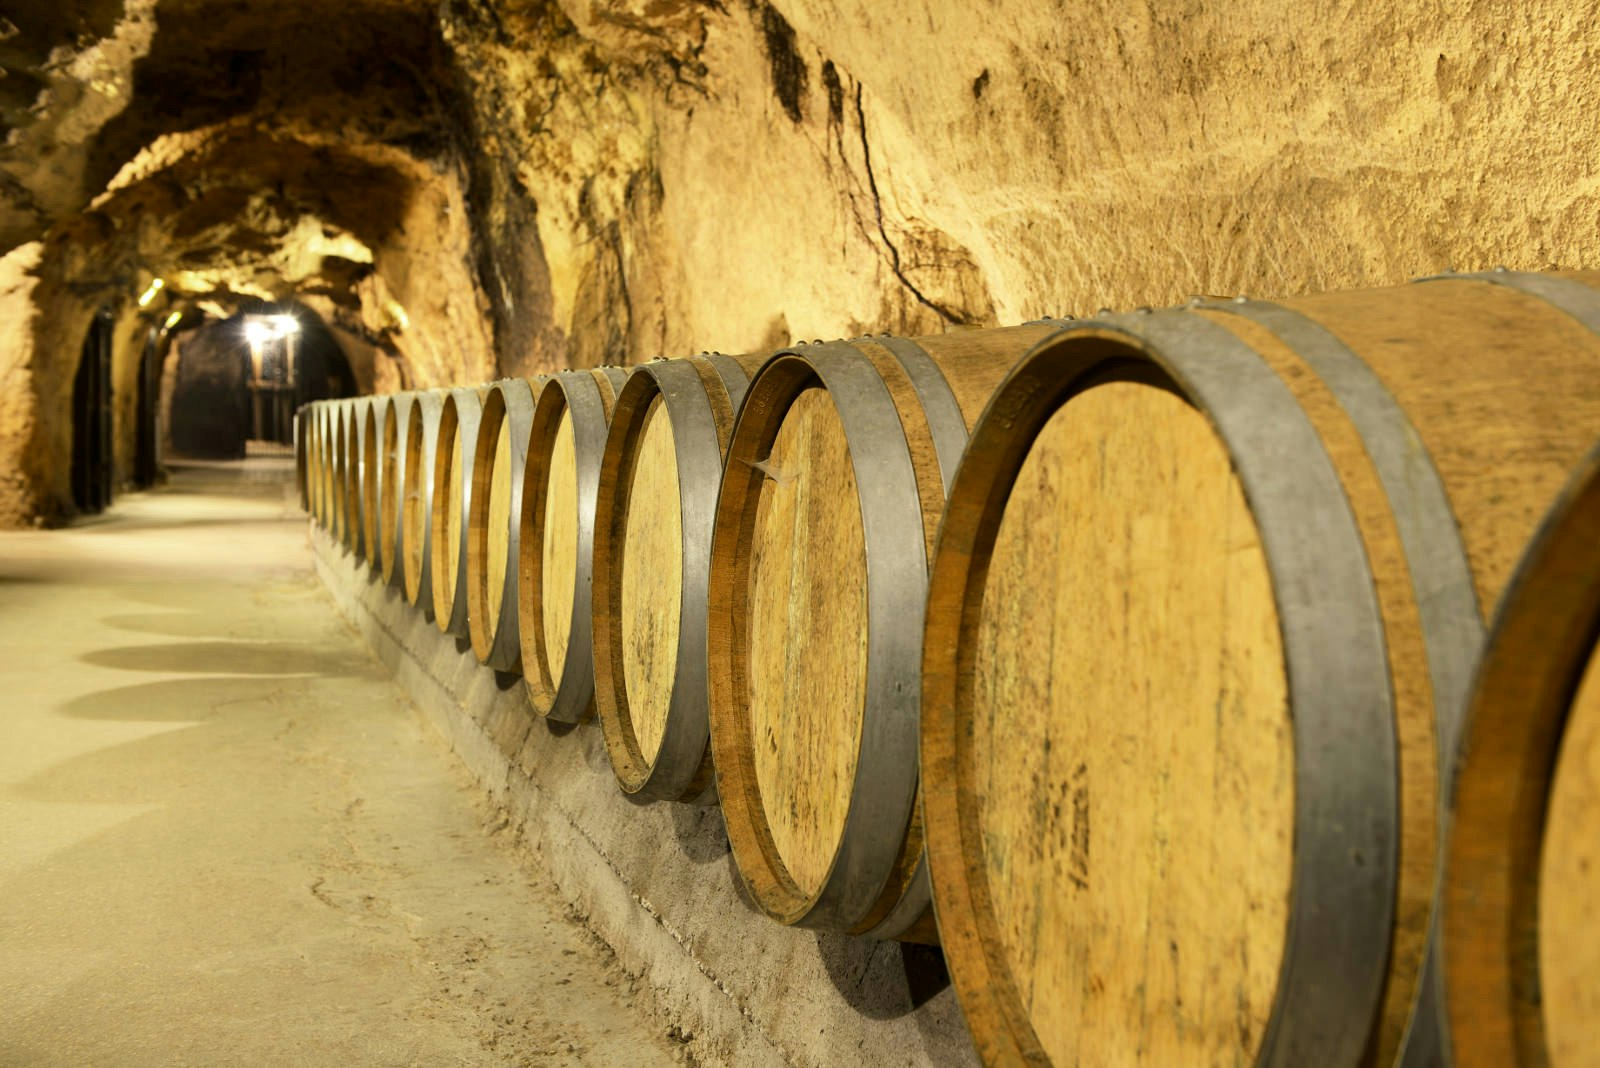 An old cellar of a traditional wine producer in Beirut, Lebanon © fmajor / Getty Images